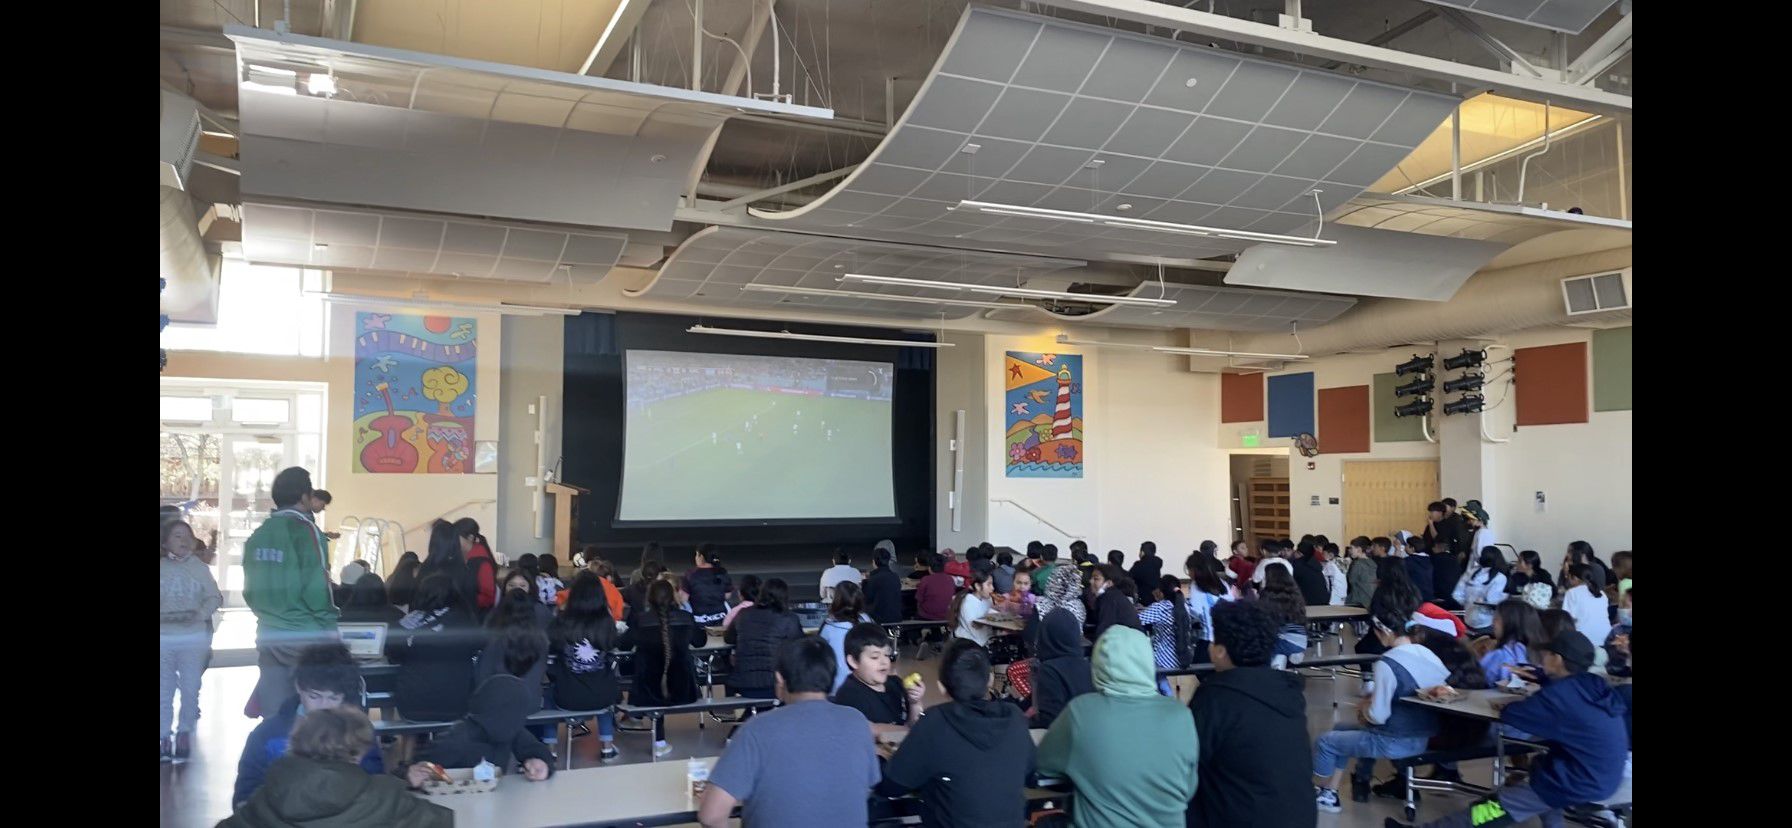 Students in the MU watching the soccer game